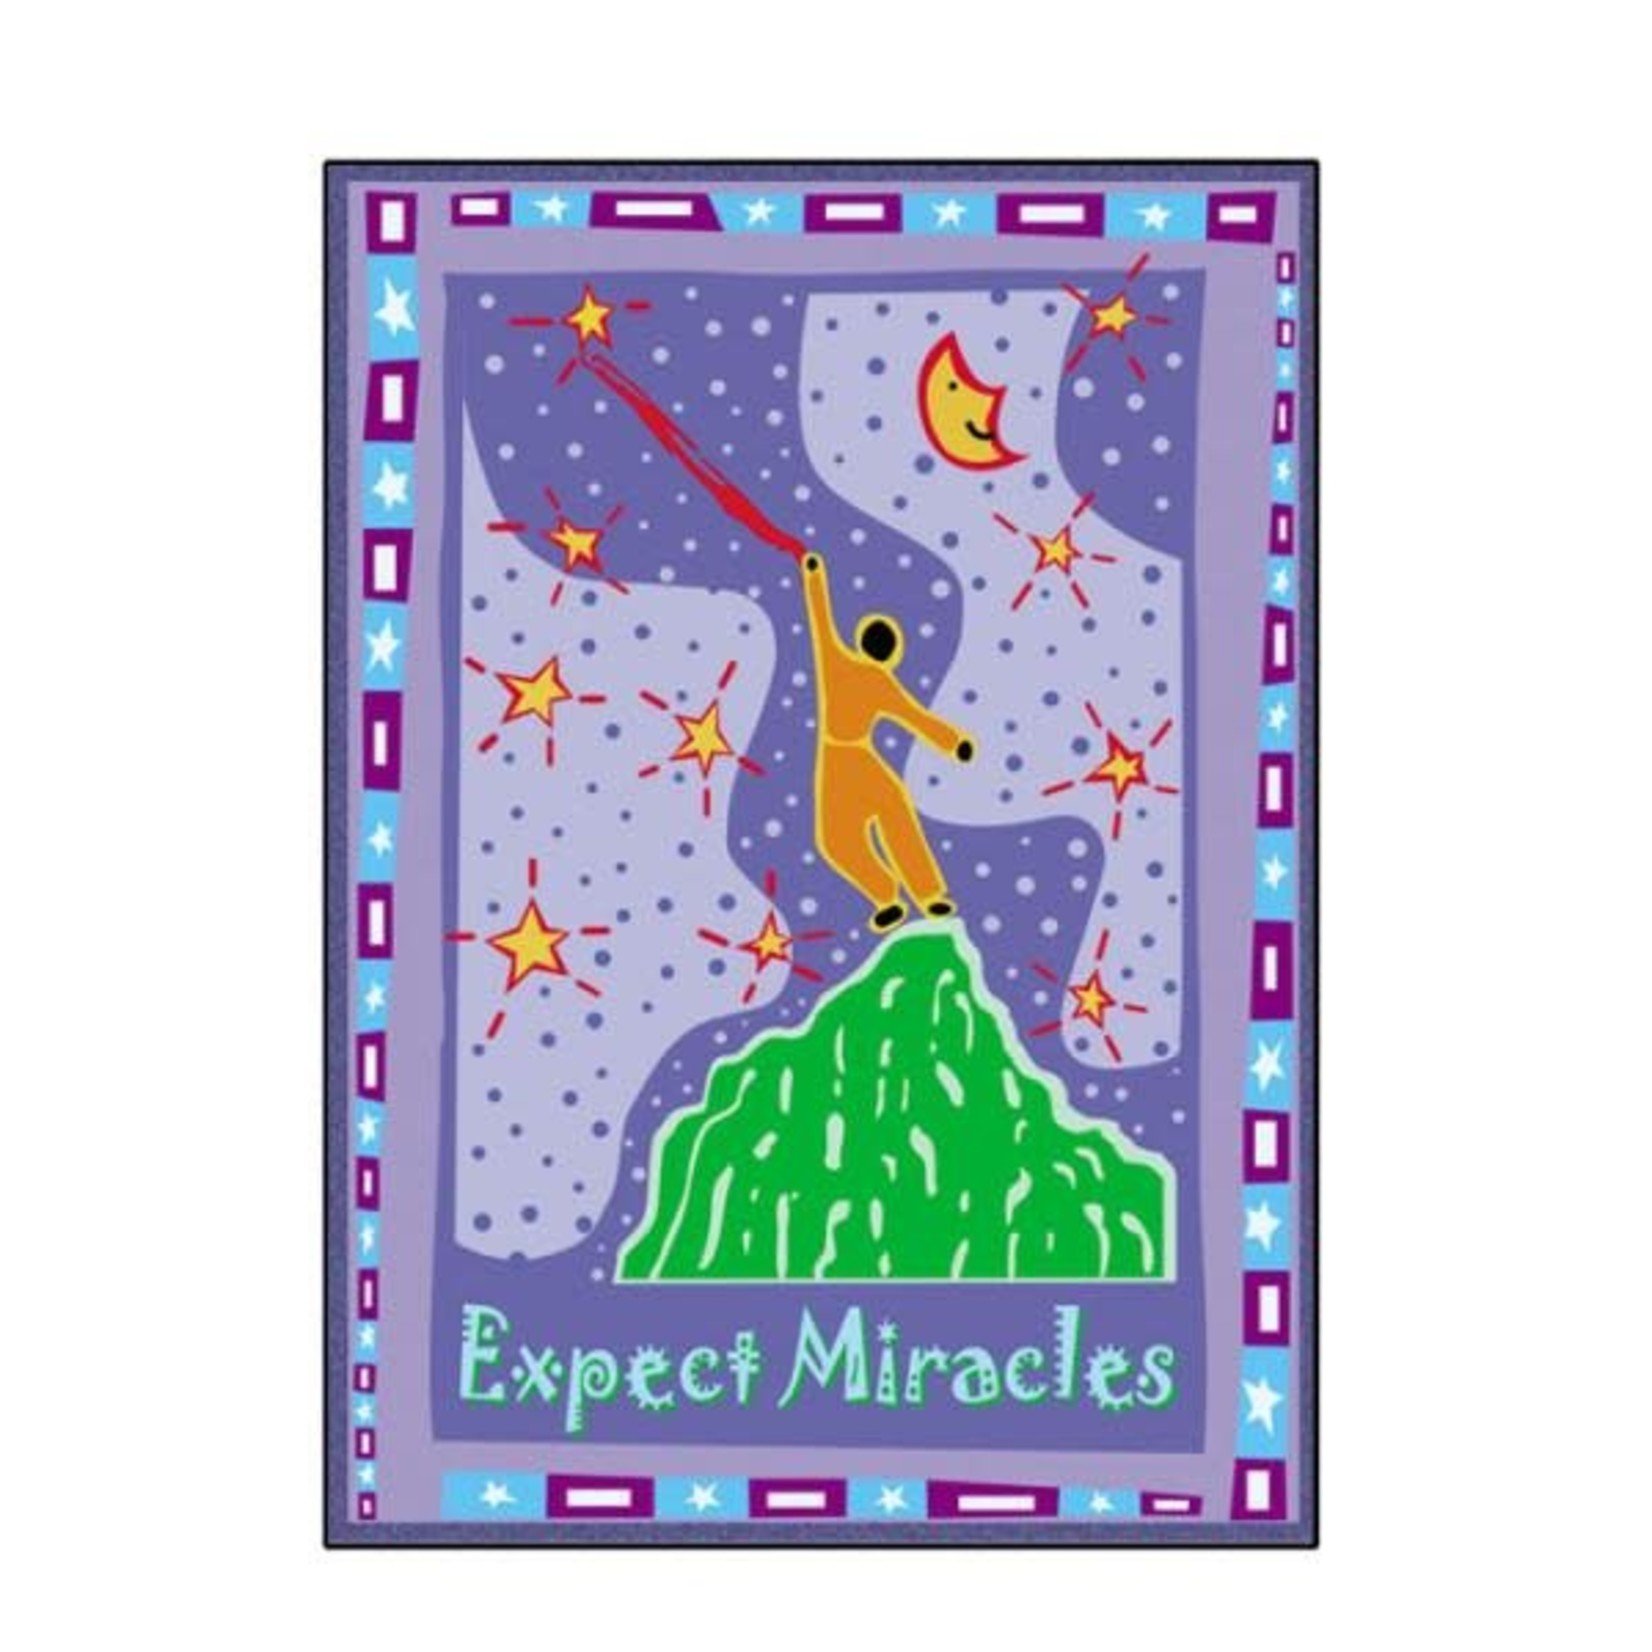 Greeting Cards (Expect Miracles)